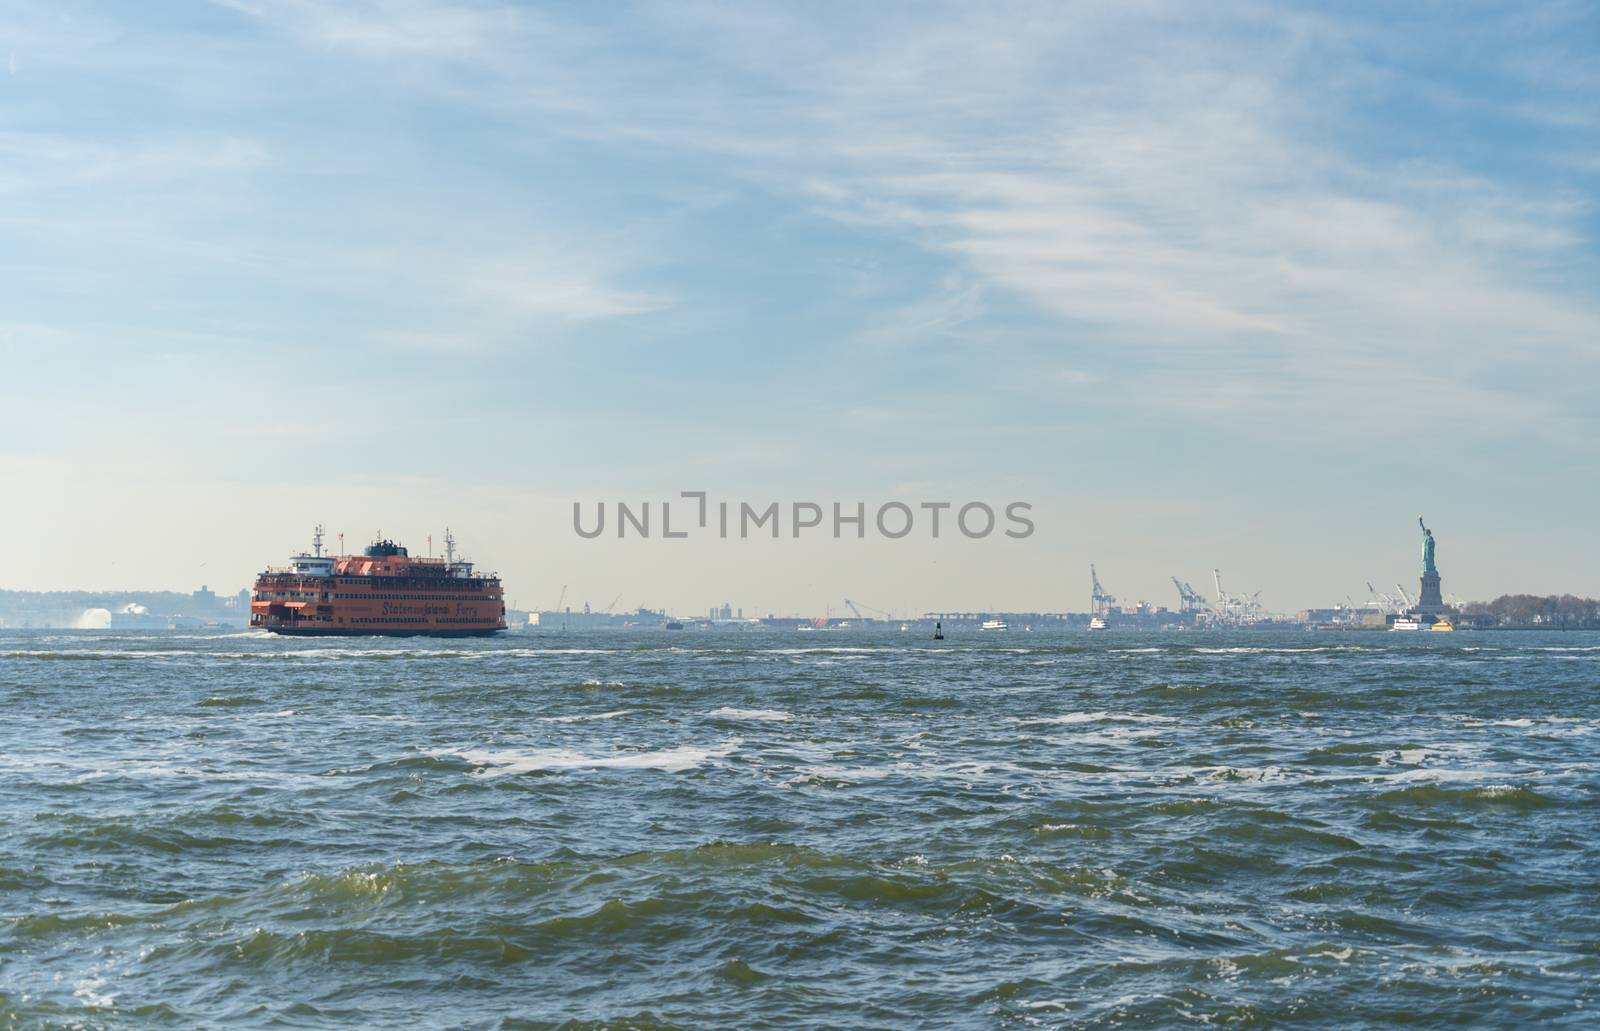 Staten Island Ferry cruises past the Statue of Liberty in New York City, NY.